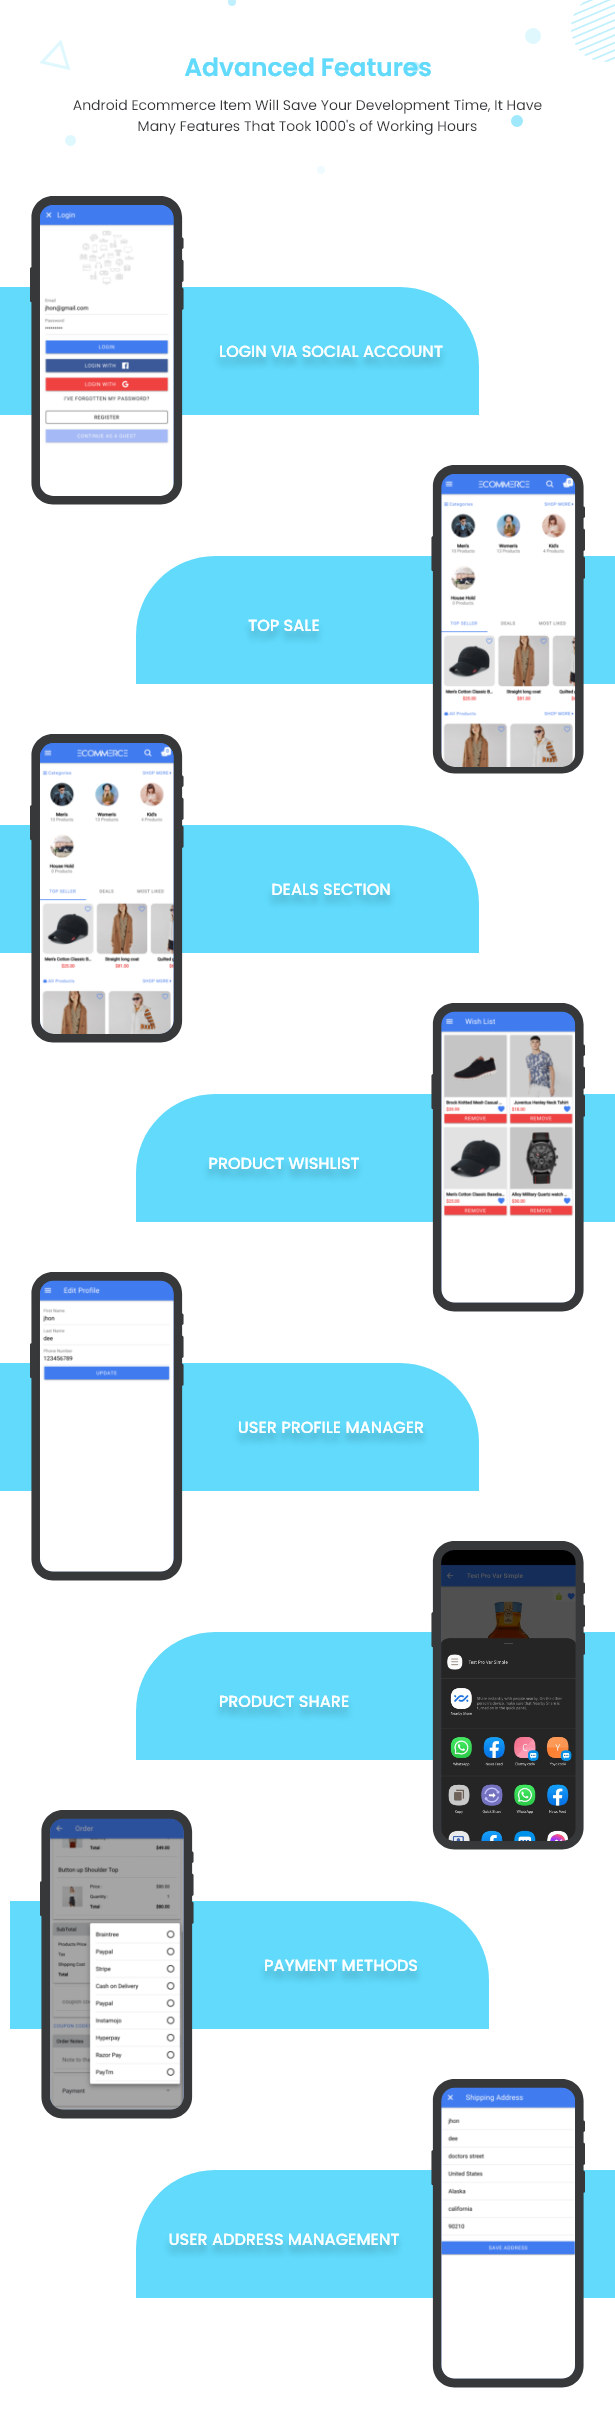 React Ecommerce - Universal iOS & Android Ecommerce / Store Full Mobile App with PHP Laravel CMS - 23